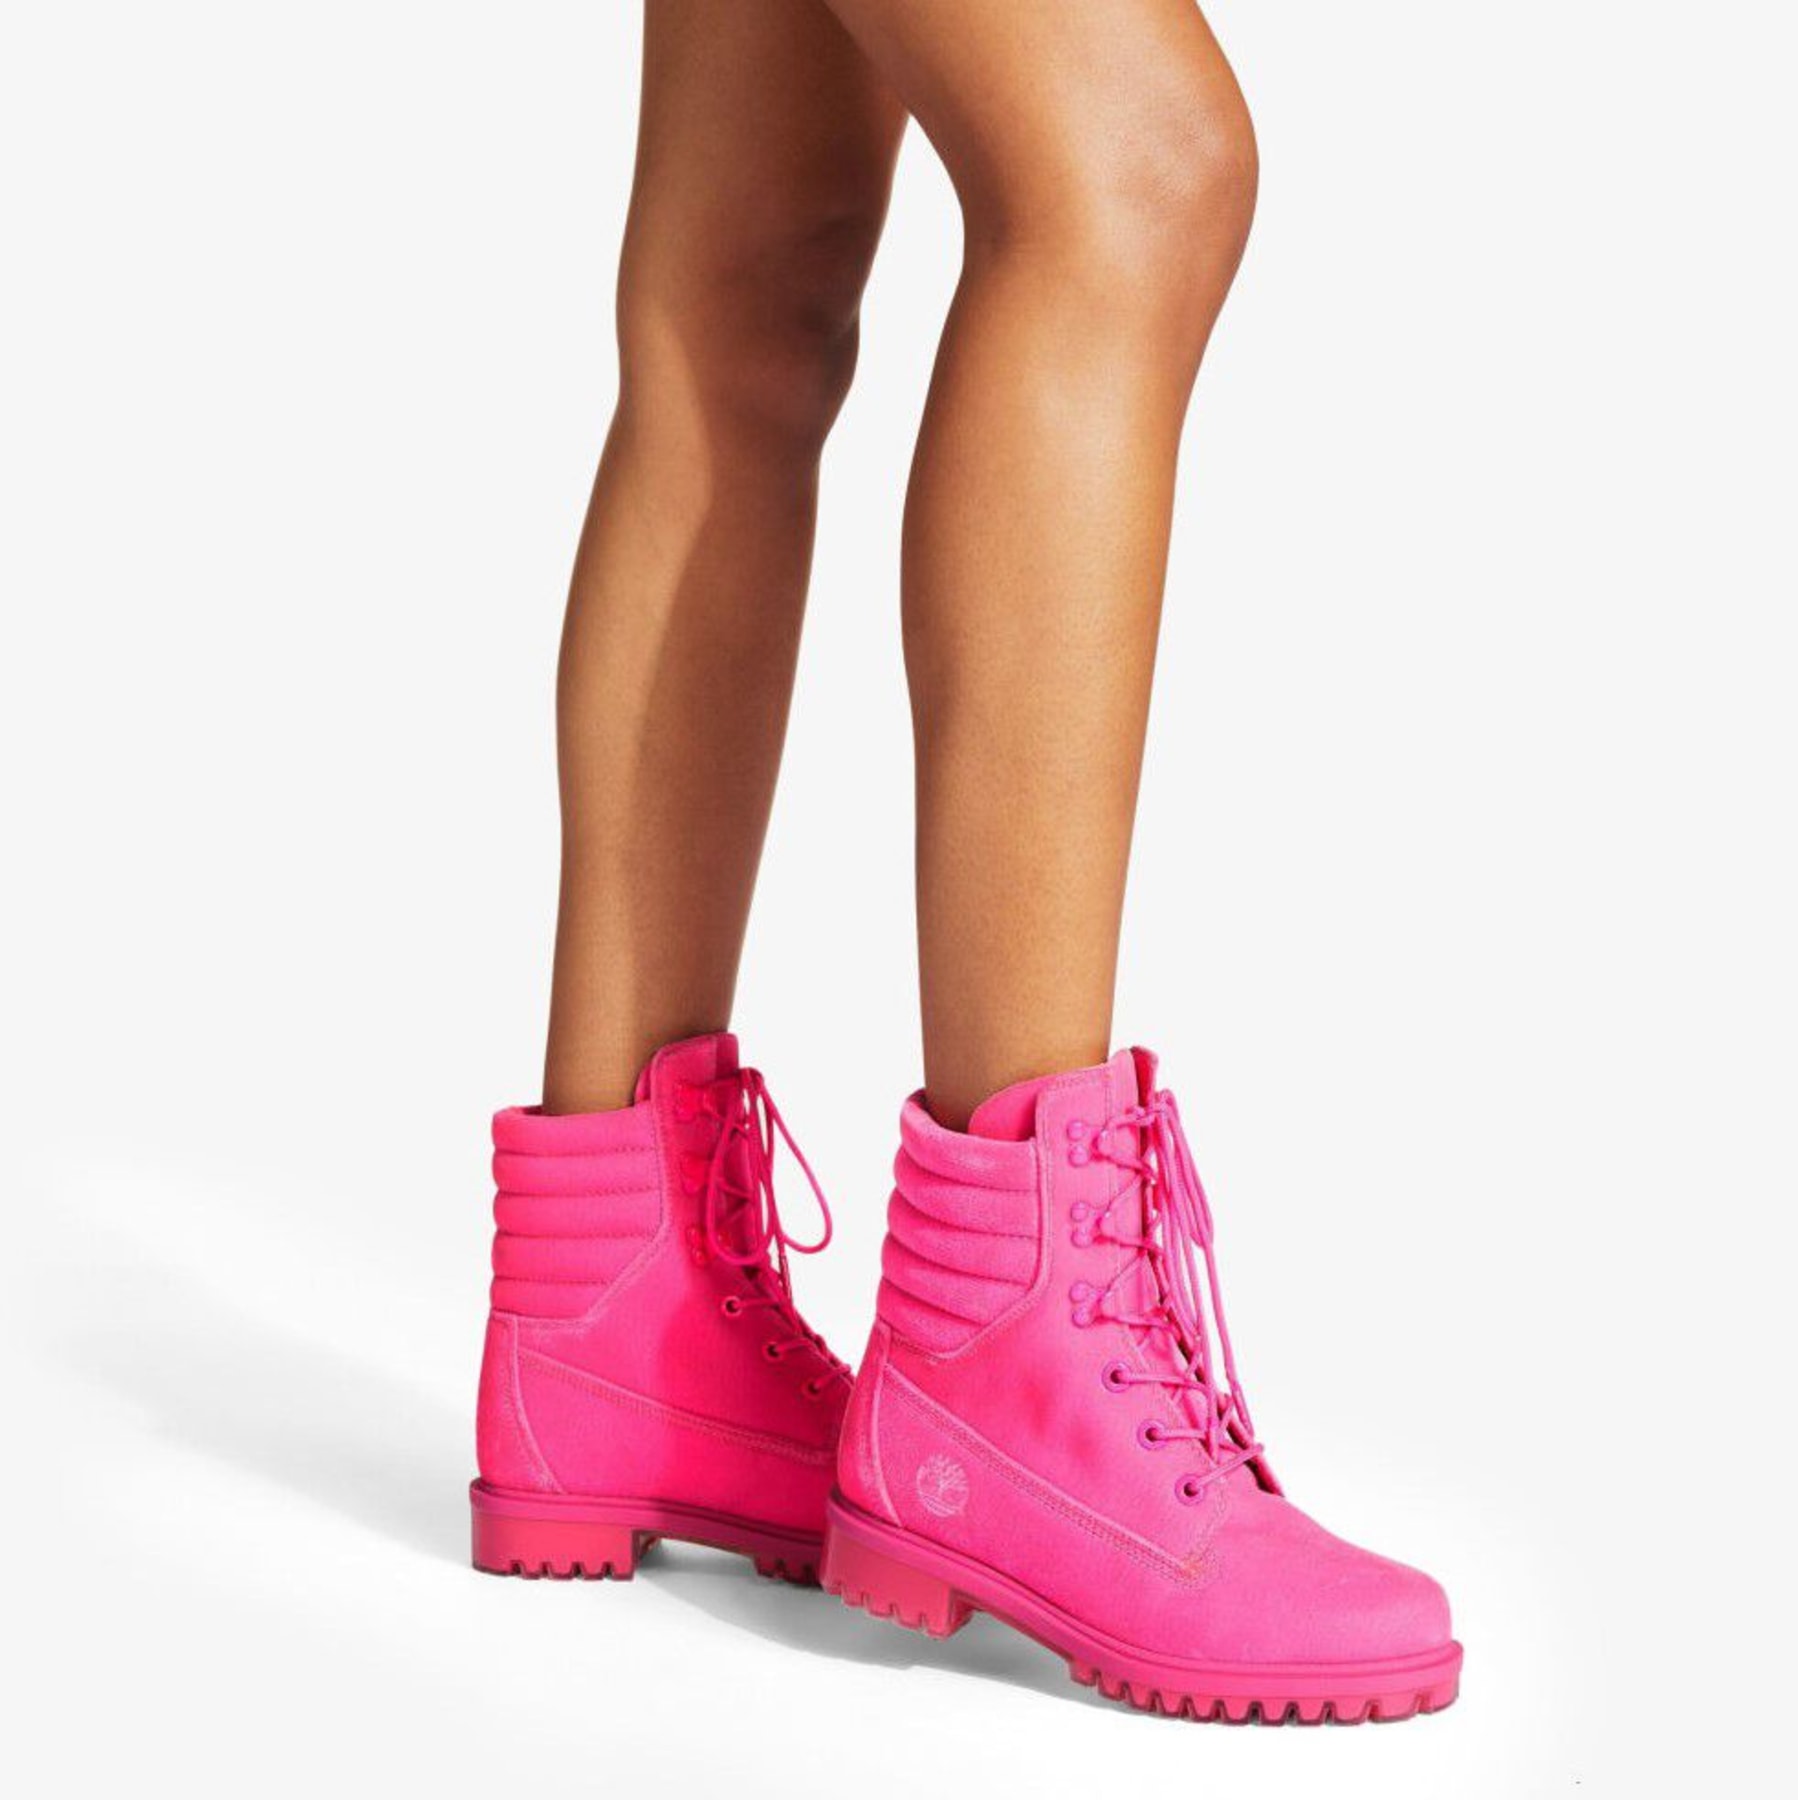 Interacción defecto Noticias Hot Pink Timberland Velvet Ankle Boots | JIMMY CHOO X TIMBERLAND 8 INCH  PUFFER BOOT | Jimmy Choo x Timberland Collection | JIMMY CHOO